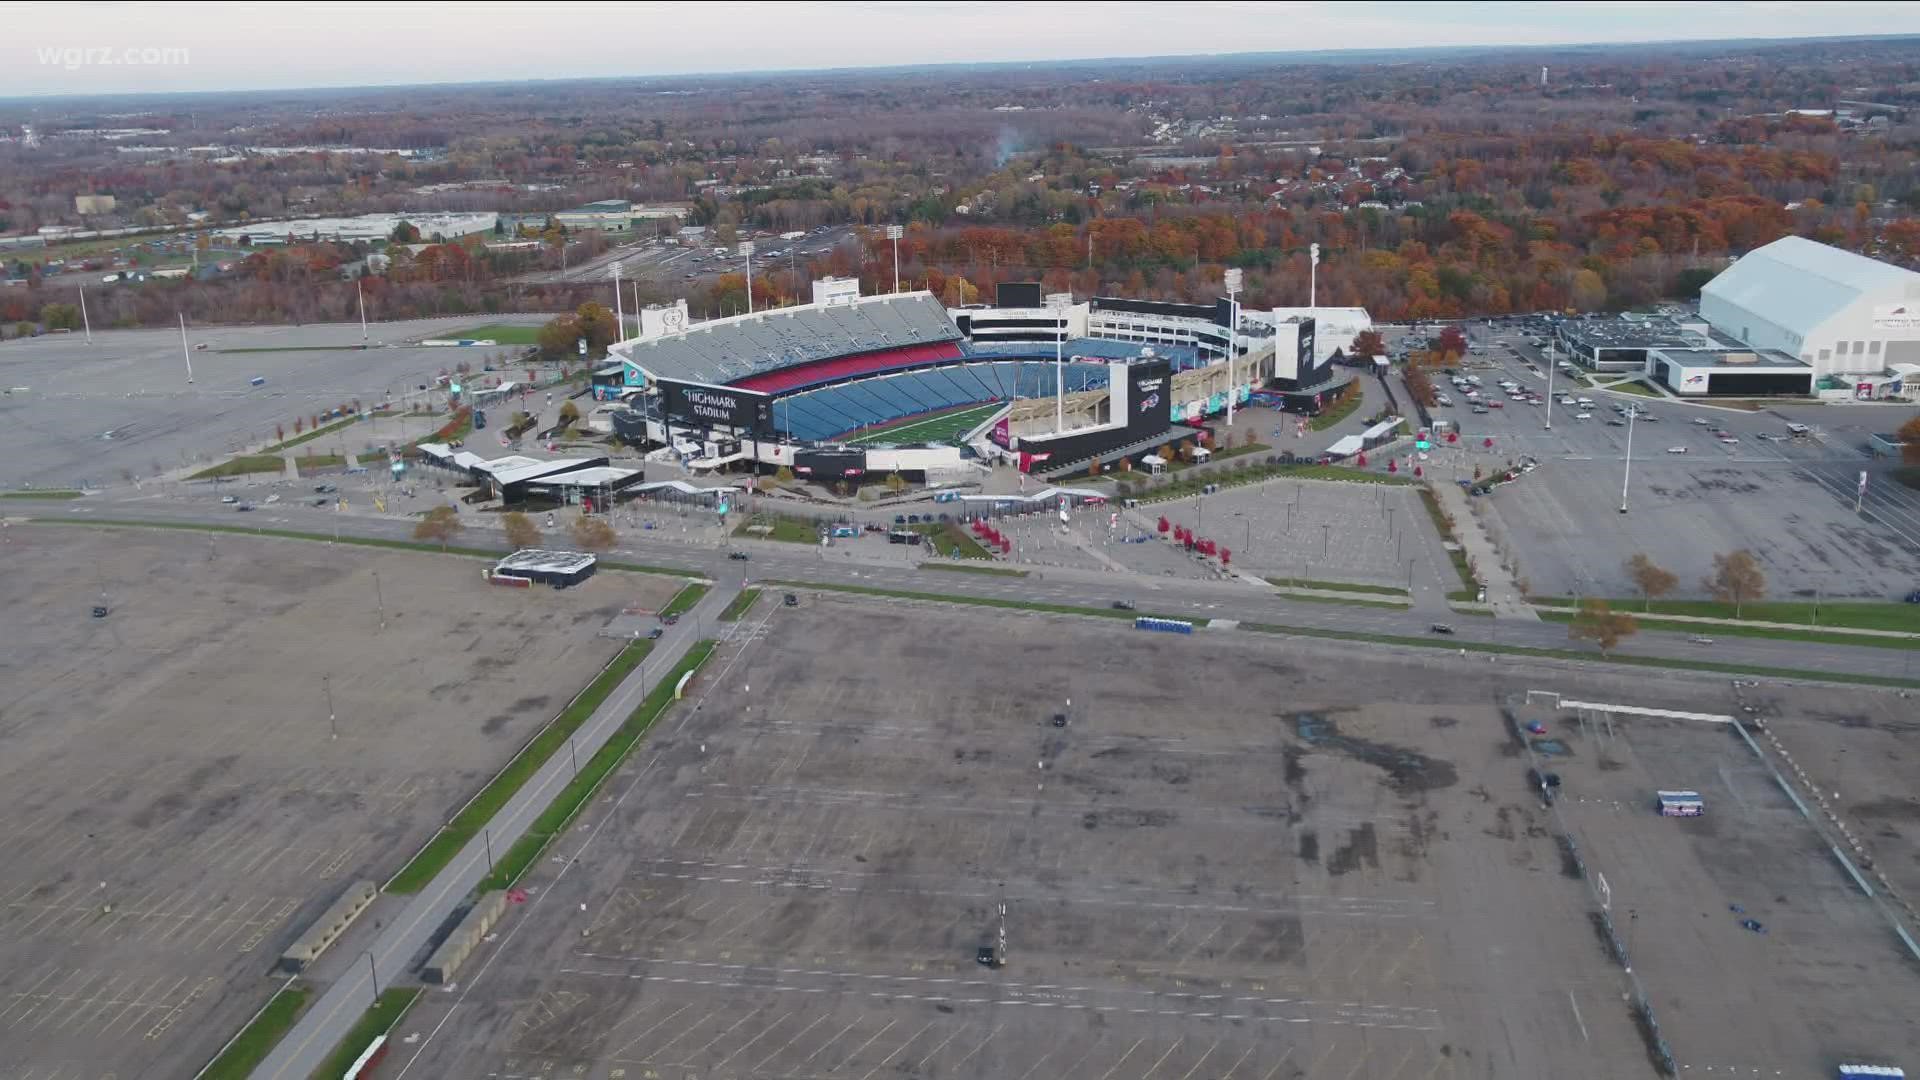 A Deal For A New Stadium In Orchard Park